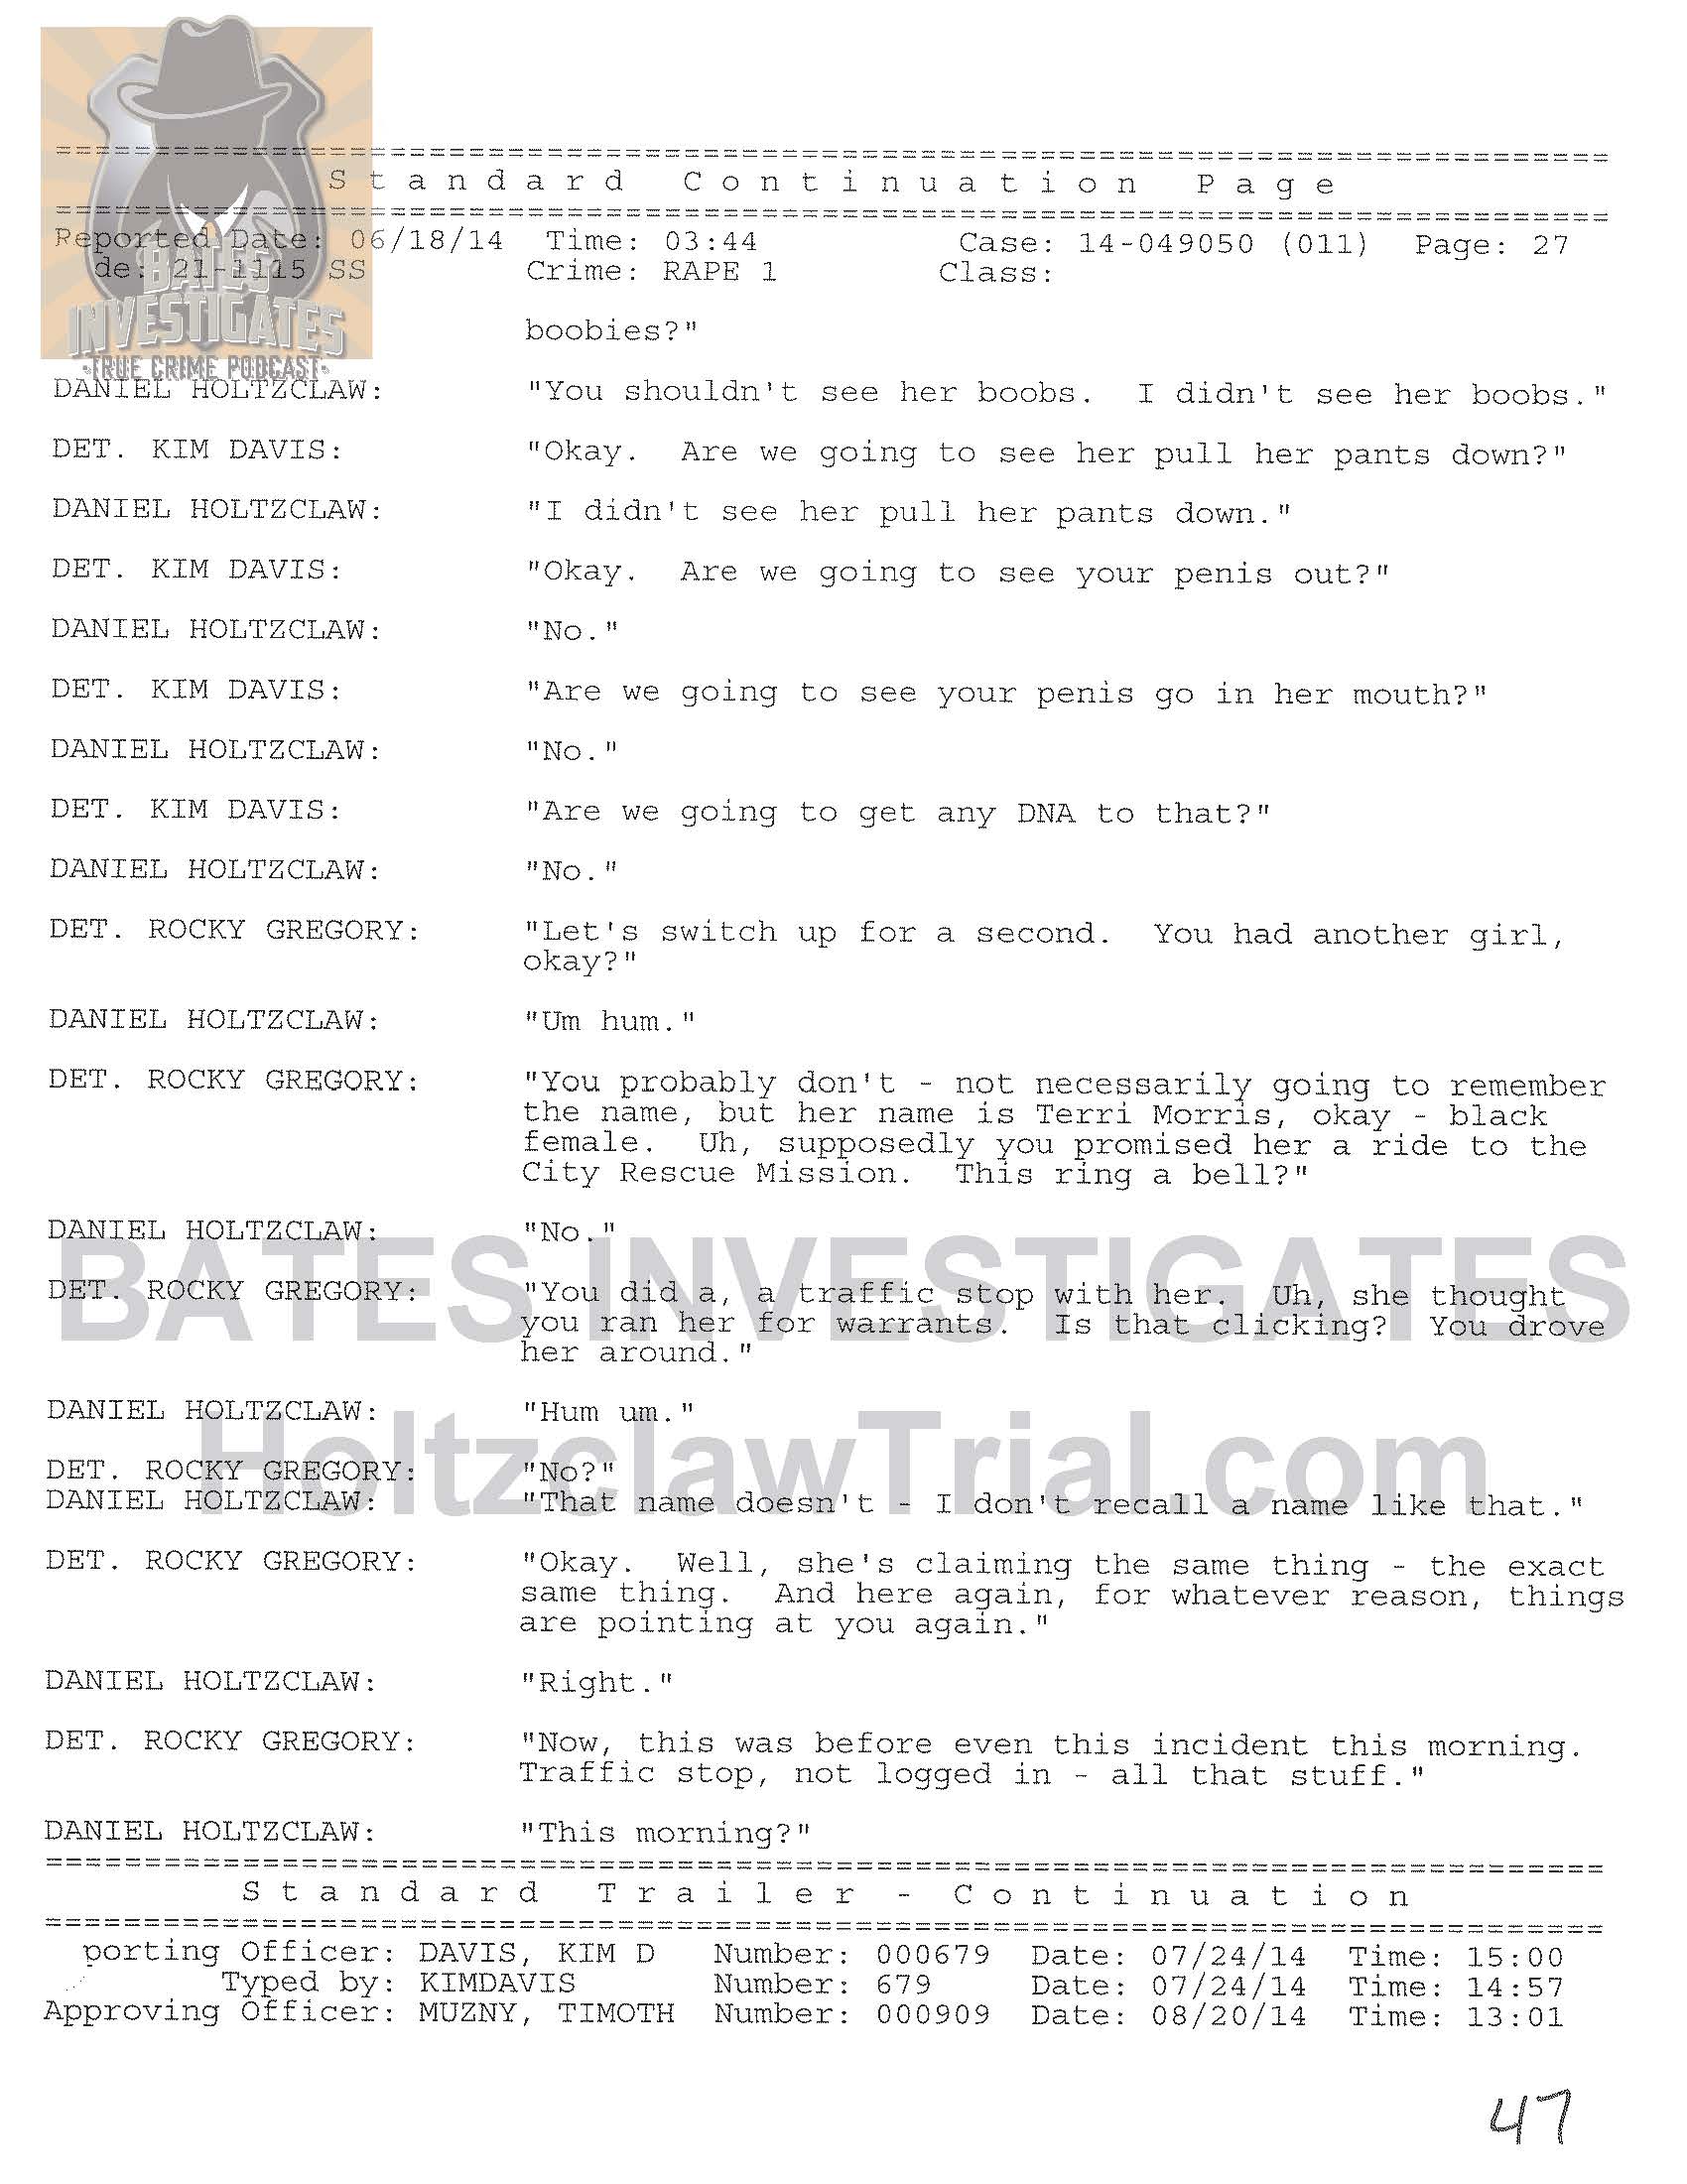 Holtzclaw Interrogation Transcript - Ep02 Redacted_Page_27.jpg